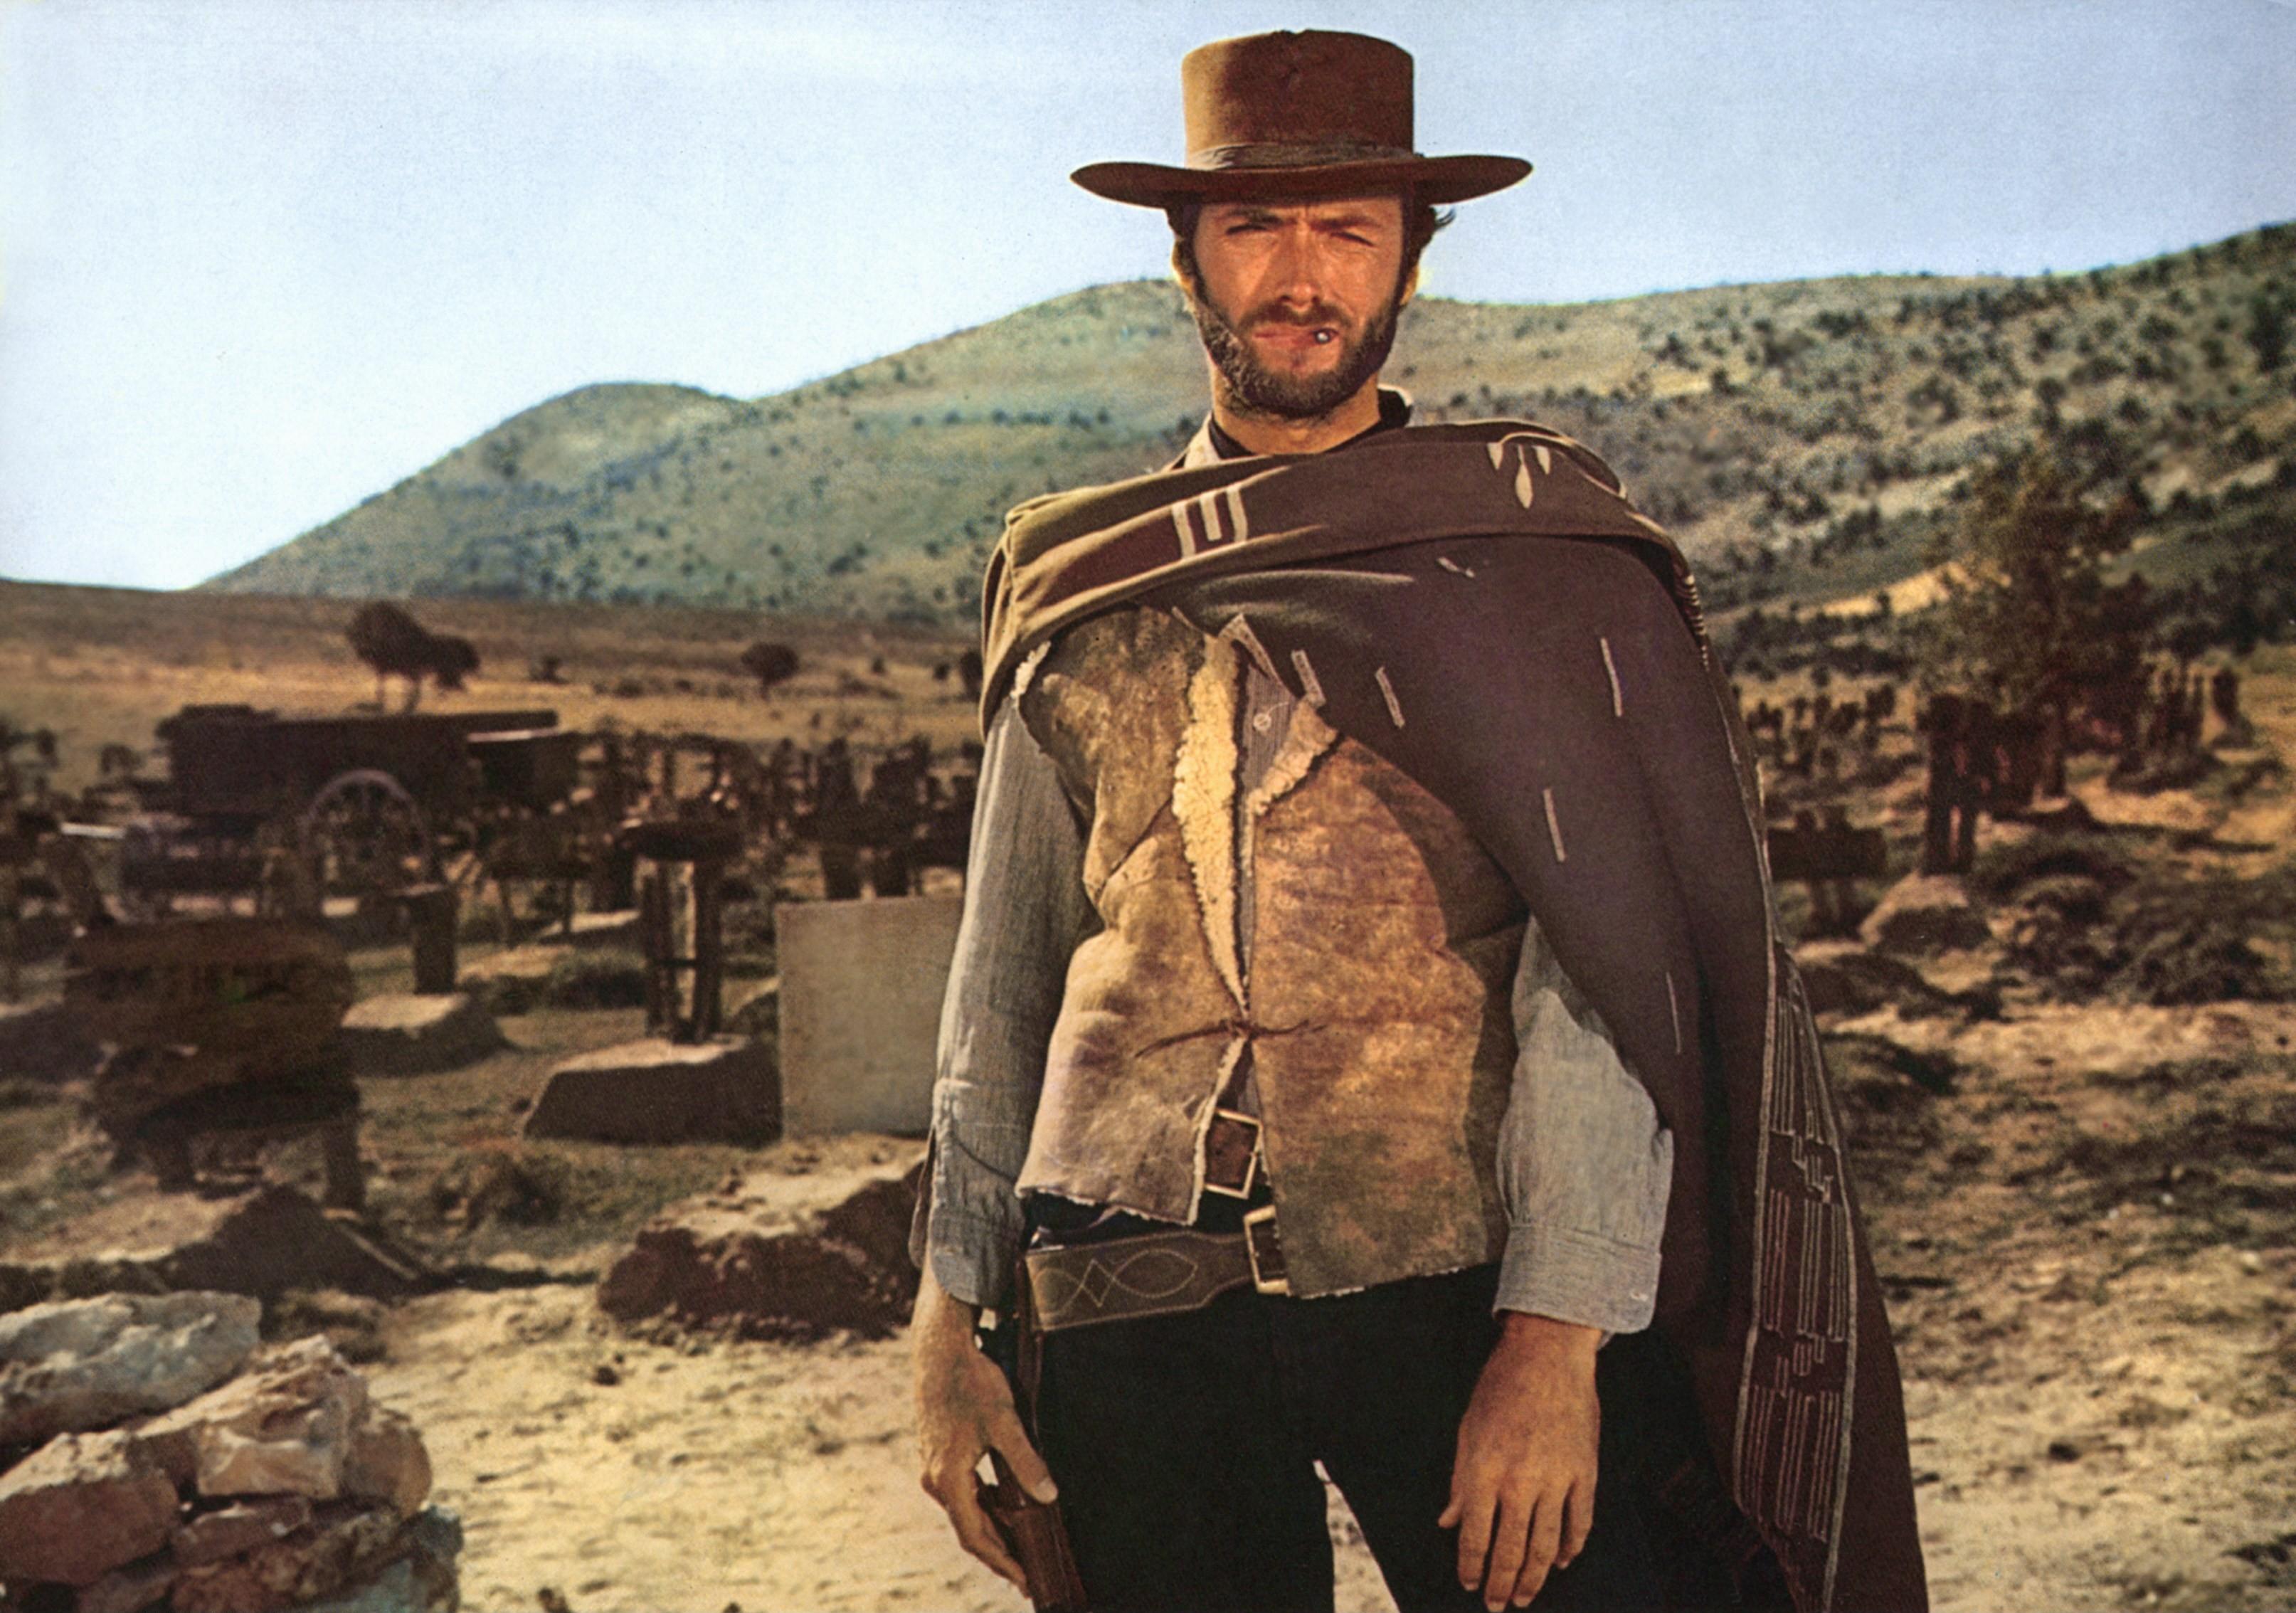 Clint gained fame in movies like The Good, The Bad, And The Ugly